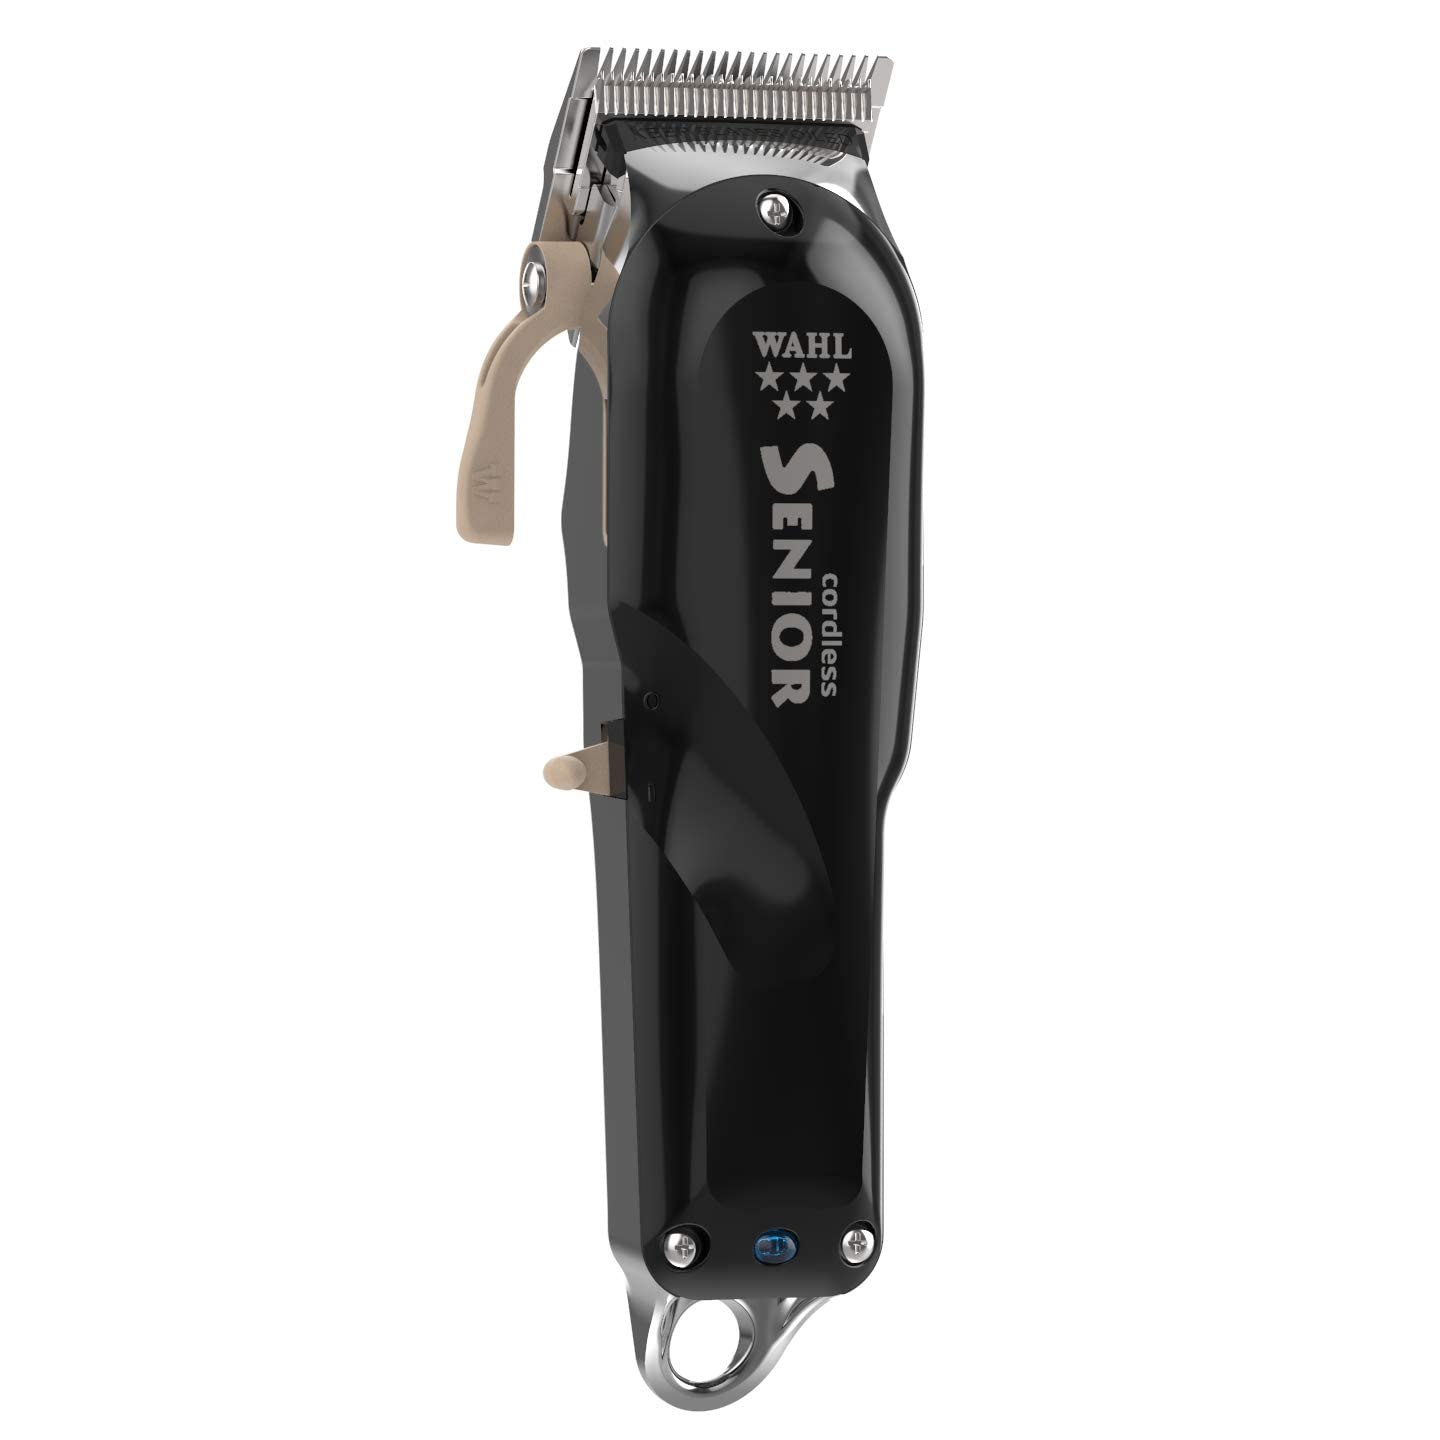 Wahl Professional 5 Star Series Cordless Senior Clipper with Adjustable Blade Best clippers for black barbers